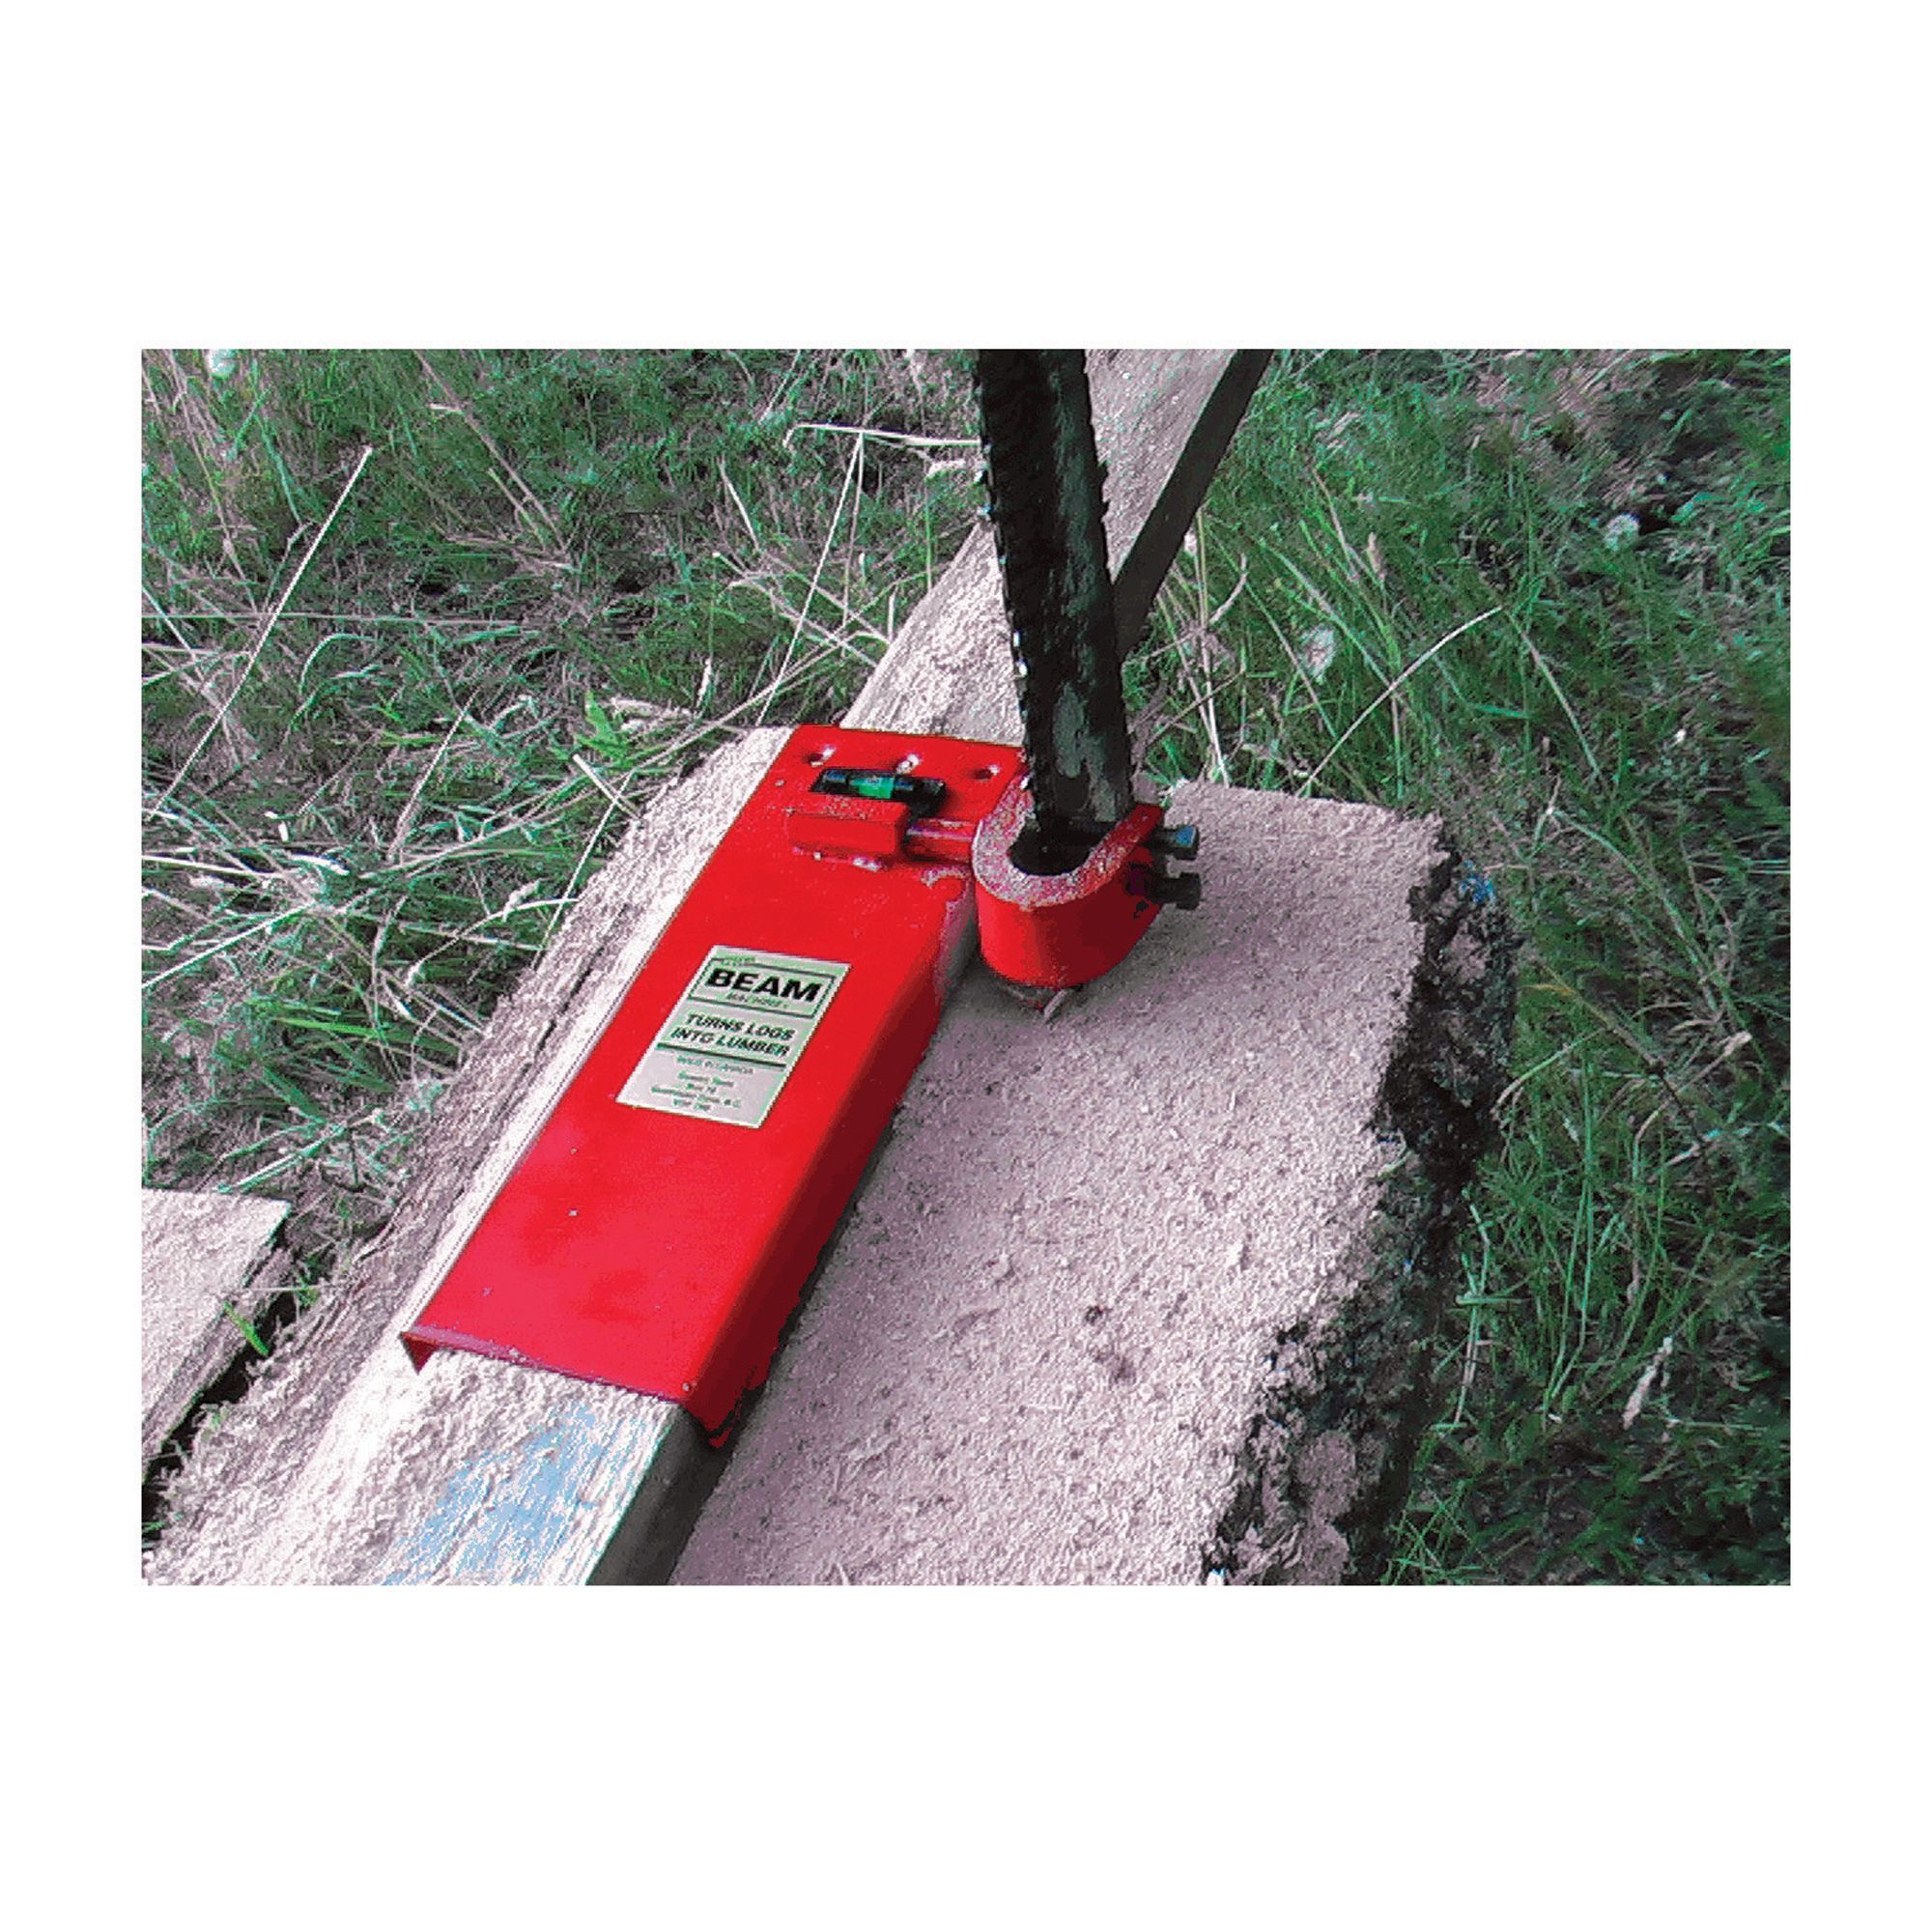 Turn logs into lumber with the Beam Machine, which attaches securely to any chain saw and converts it into a portable sawmill.